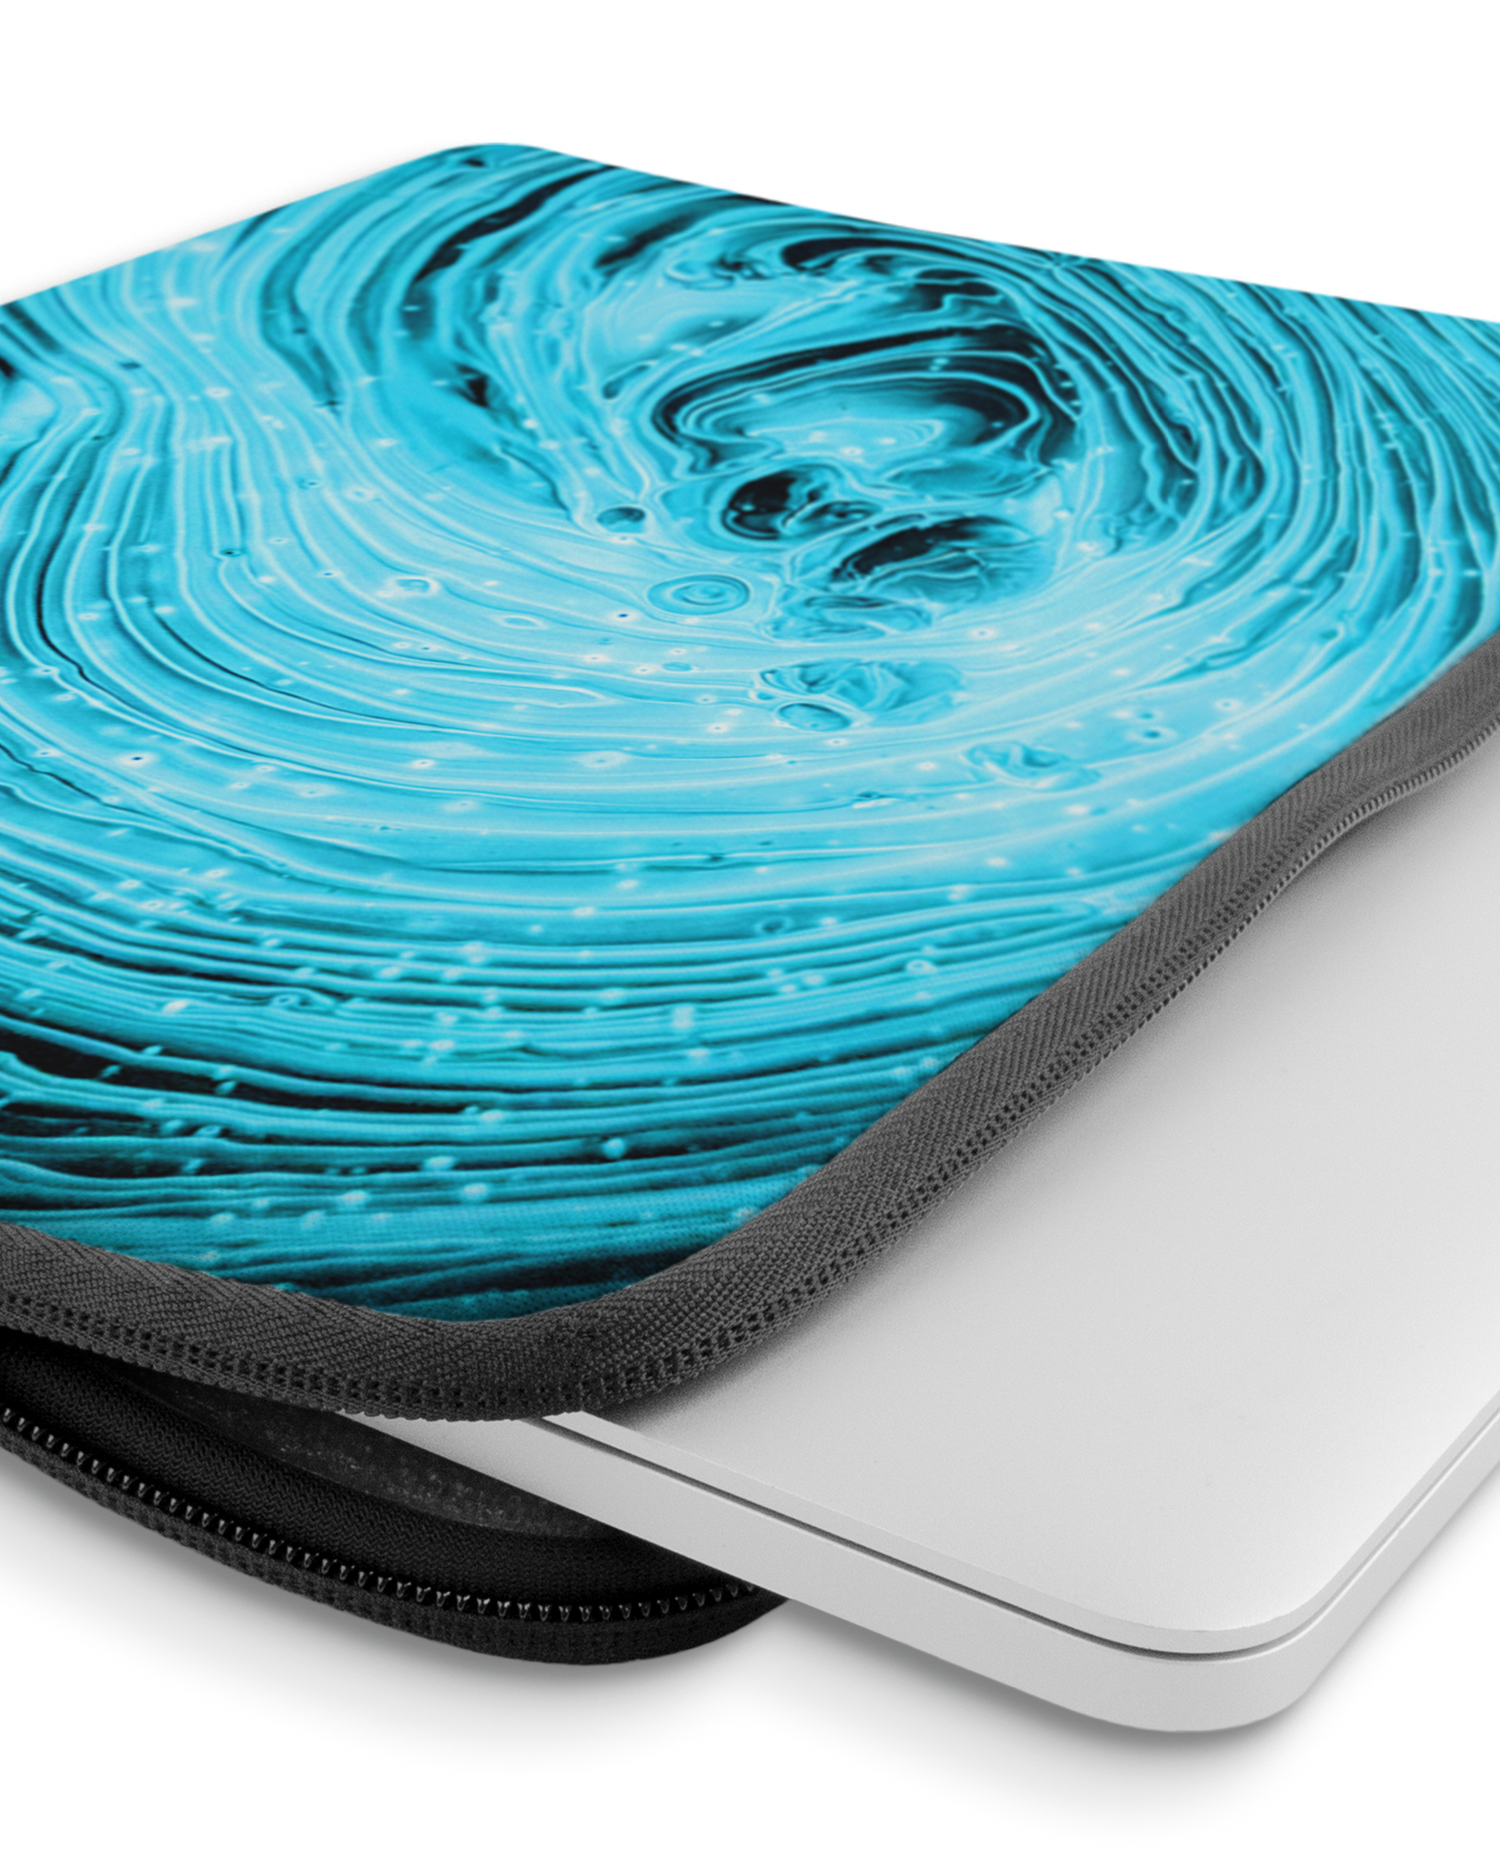 Turquoise Ripples Laptop Case 14 inch with device inside